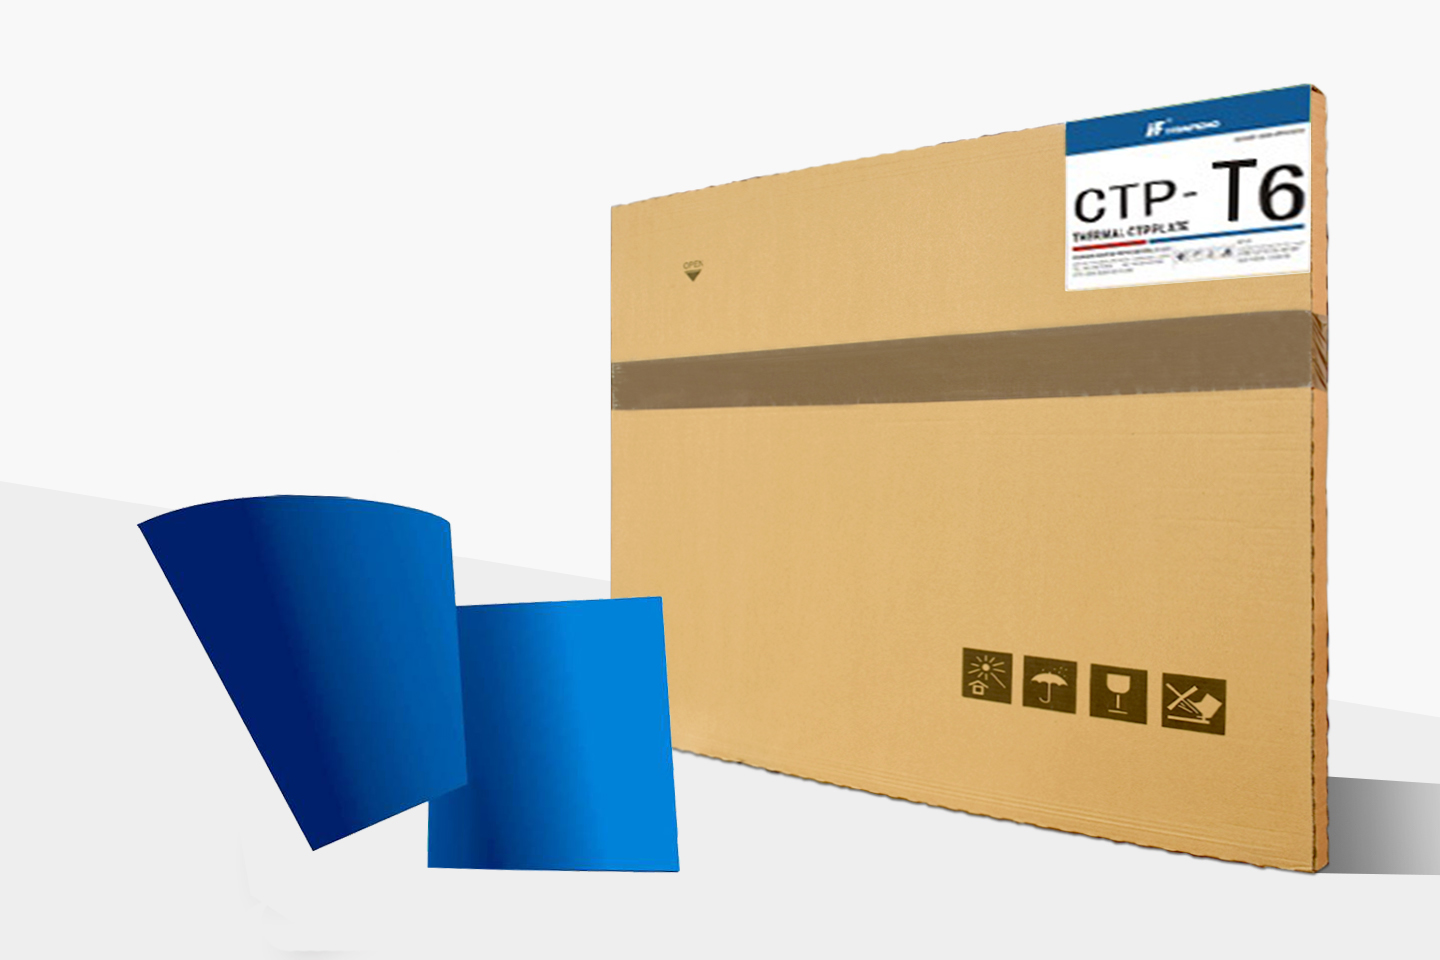 Ctp-t6 series positive thermal CTP version